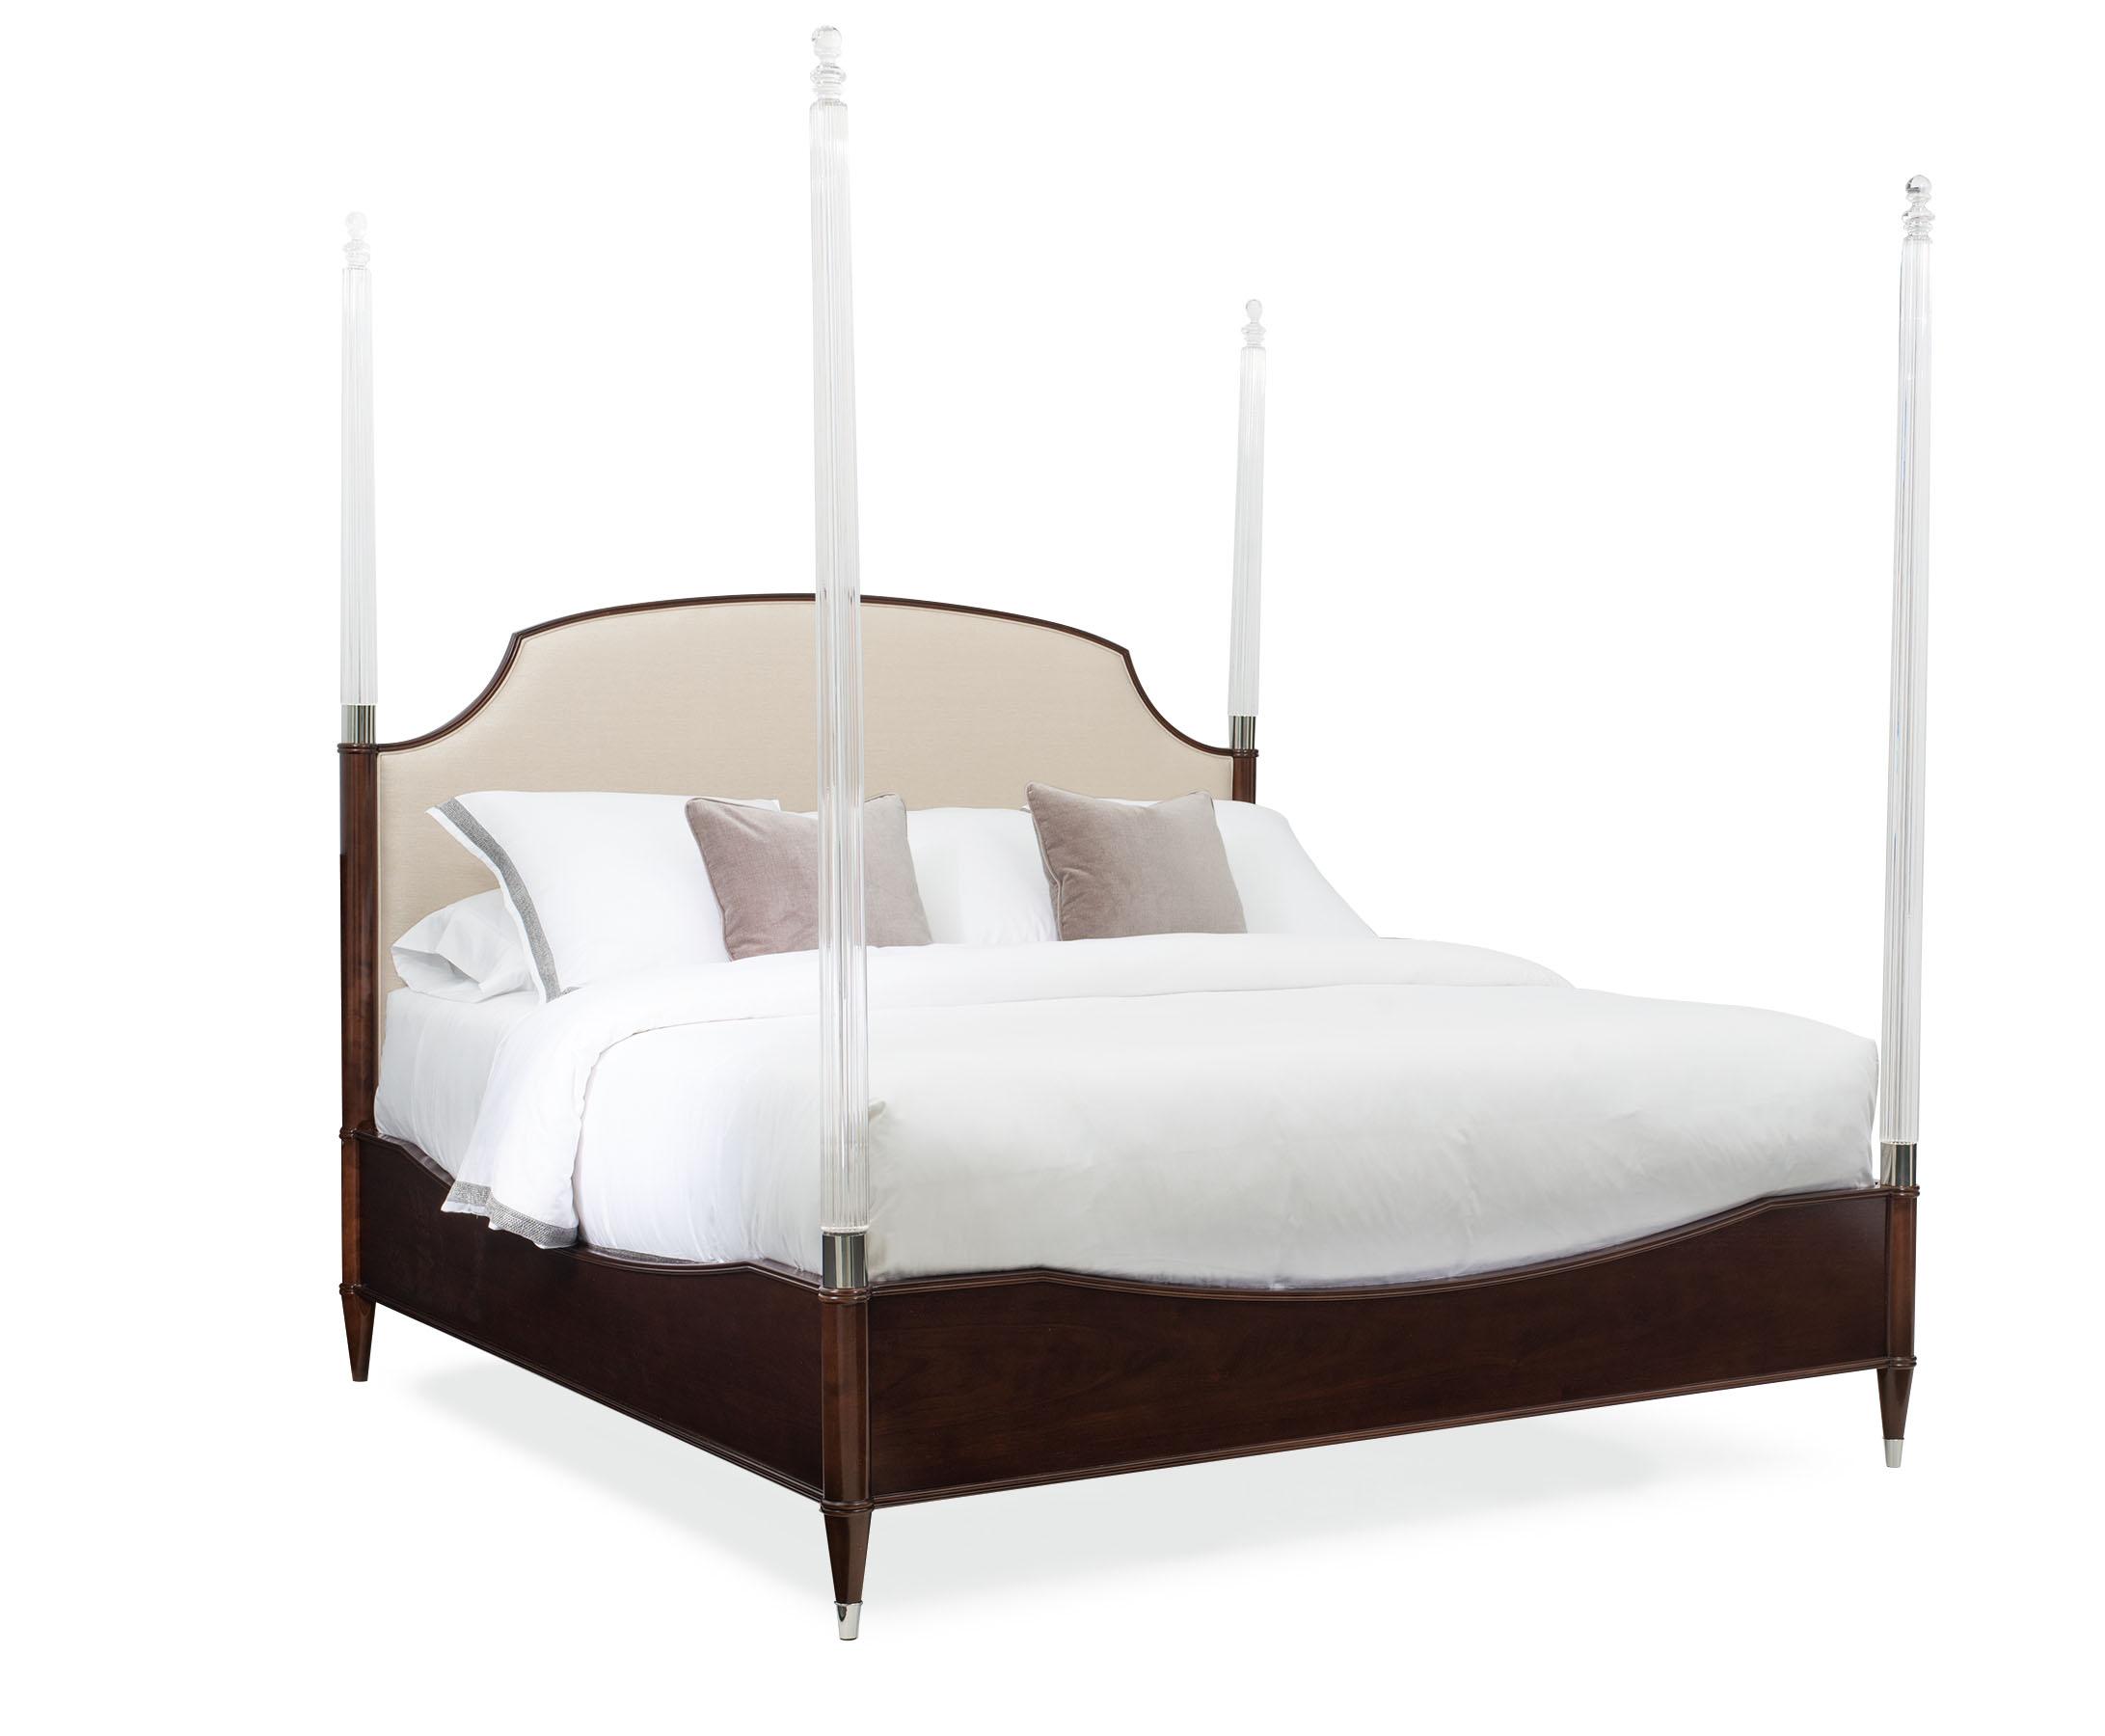 Contemporary Poster Bed Crown Jewel w/ Post CLA-420-107 in Mocha, Beige Fabric